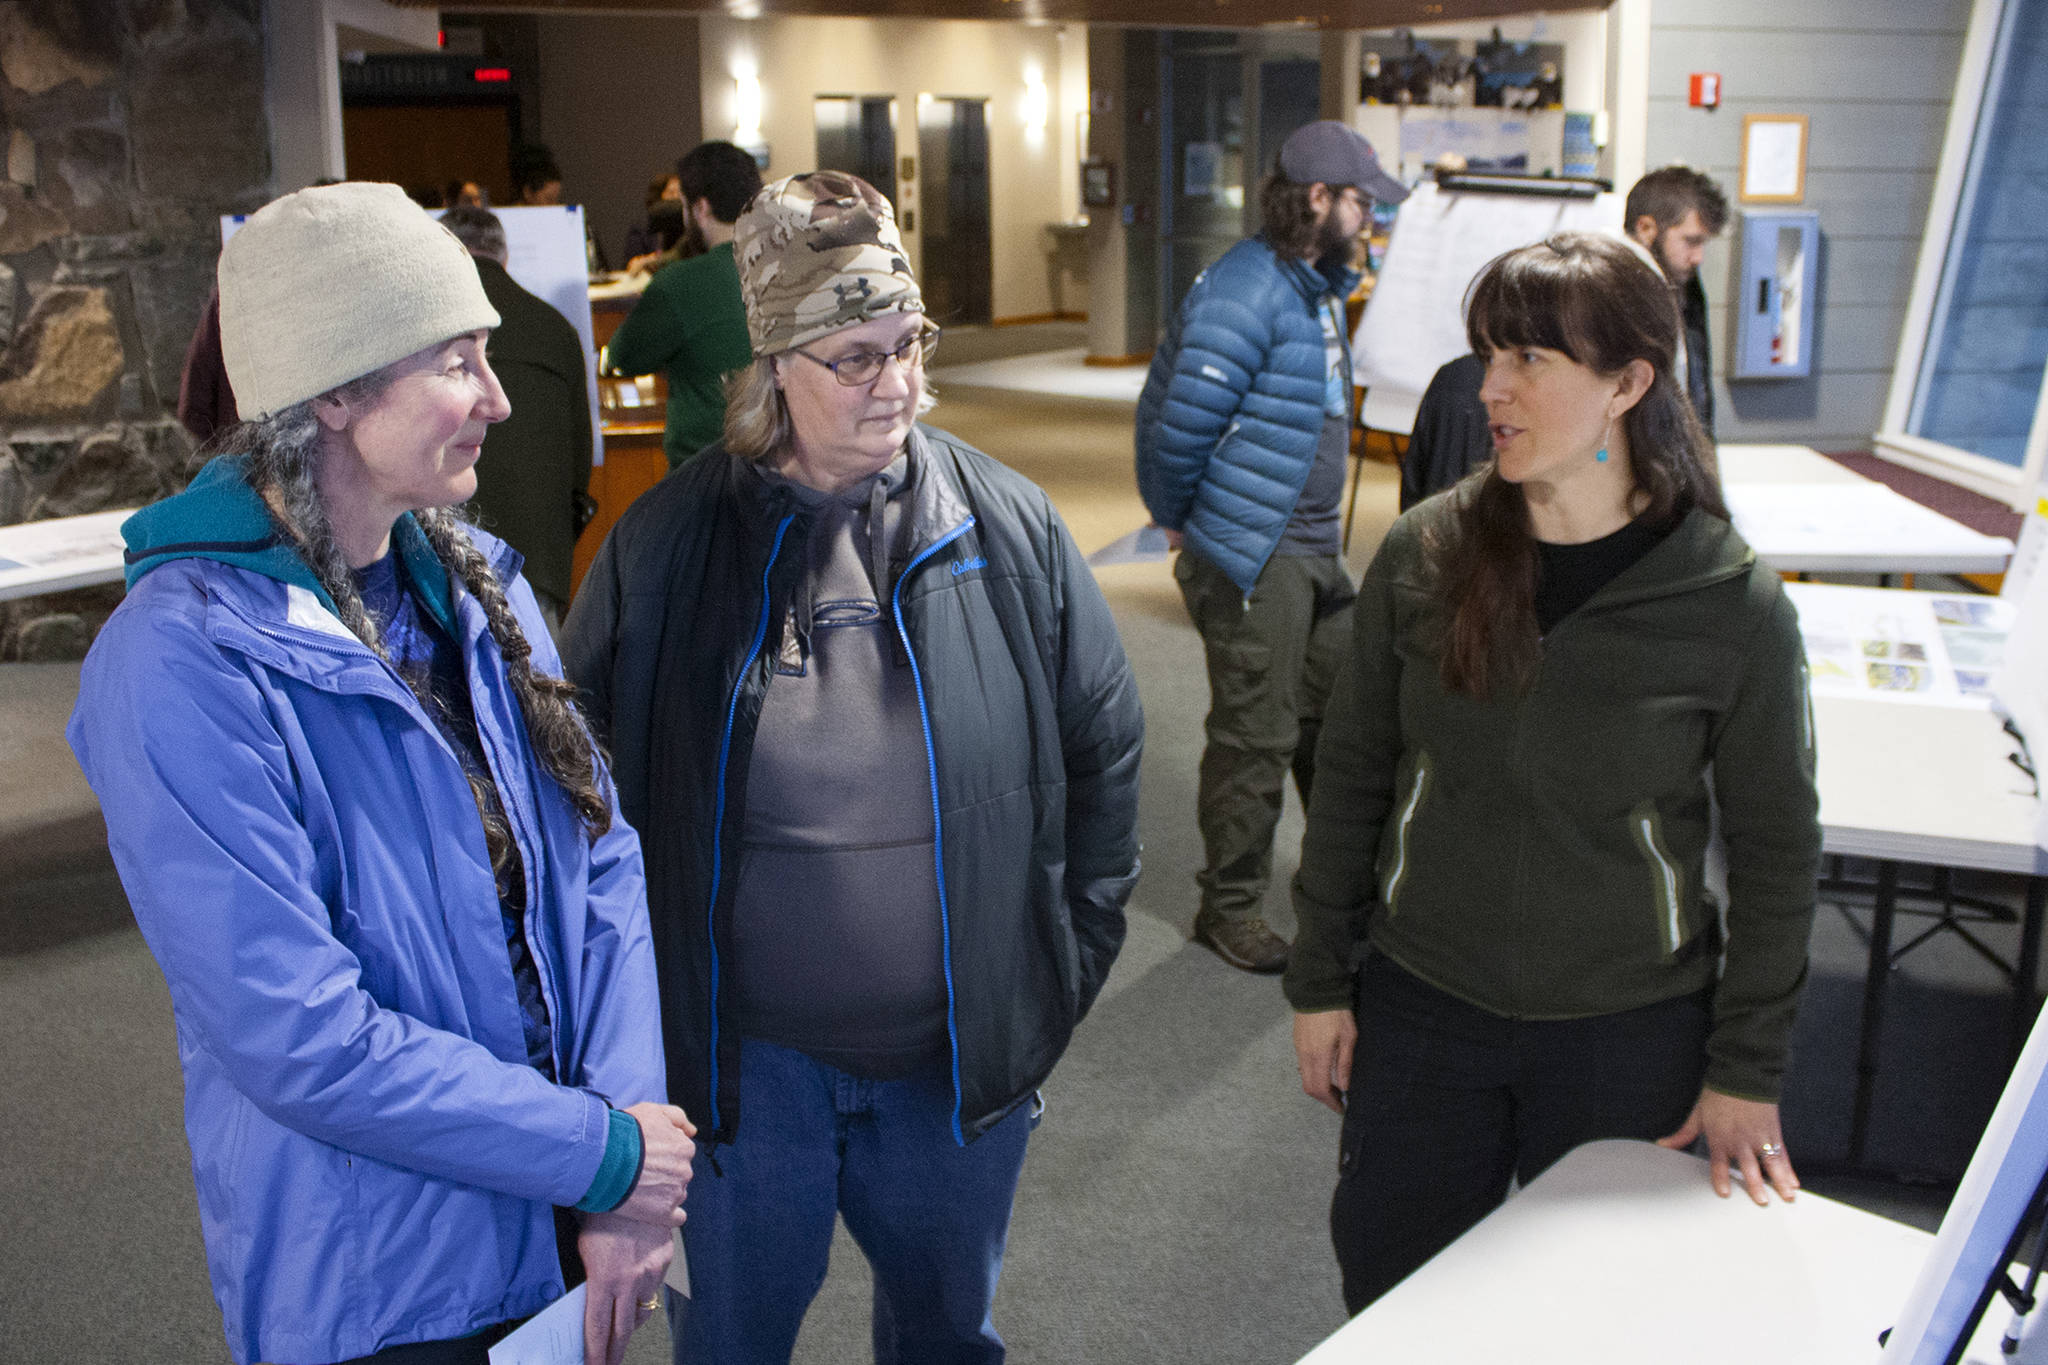 Pam Kihlmire and Elizabeth Flory talk with Dani Snyder, Tongass National Forest landscape architect, during an open house Thursday night at Mendenhall Glacier Visitor Center. (Ben Hohenstatt | Juneau Empire)